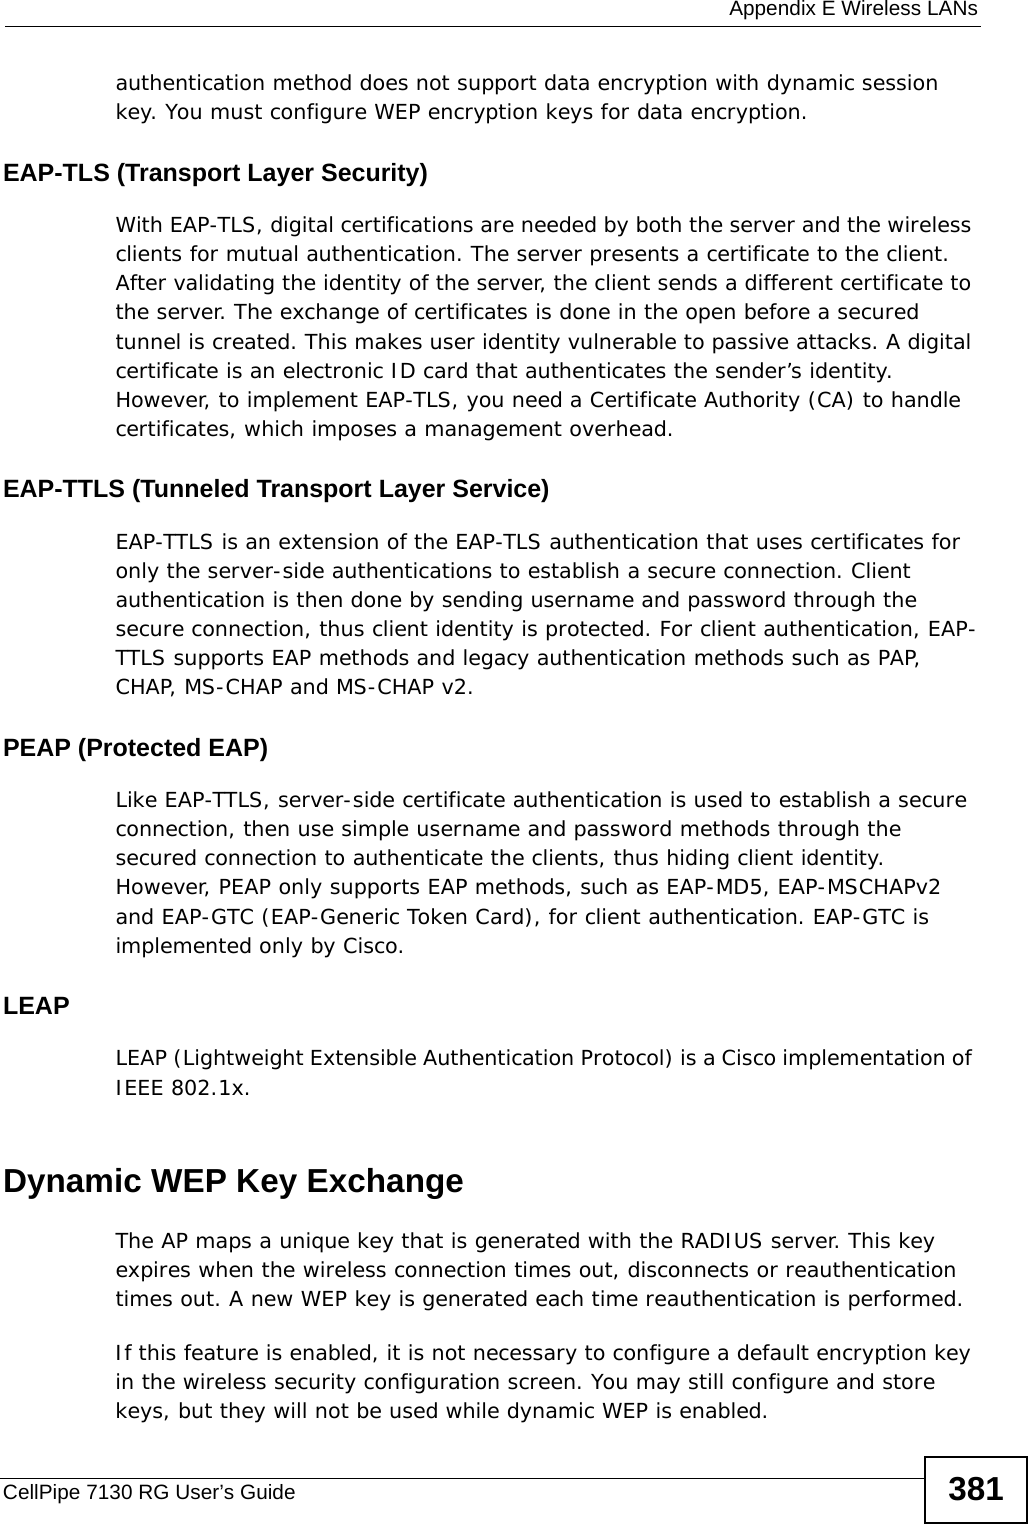  Appendix E Wireless LANsCellPipe 7130 RG User’s Guide 381authentication method does not support data encryption with dynamic session key. You must configure WEP encryption keys for data encryption. EAP-TLS (Transport Layer Security)With EAP-TLS, digital certifications are needed by both the server and the wireless clients for mutual authentication. The server presents a certificate to the client. After validating the identity of the server, the client sends a different certificate to the server. The exchange of certificates is done in the open before a secured tunnel is created. This makes user identity vulnerable to passive attacks. A digital certificate is an electronic ID card that authenticates the sender’s identity. However, to implement EAP-TLS, you need a Certificate Authority (CA) to handle certificates, which imposes a management overhead. EAP-TTLS (Tunneled Transport Layer Service) EAP-TTLS is an extension of the EAP-TLS authentication that uses certificates for only the server-side authentications to establish a secure connection. Client authentication is then done by sending username and password through the secure connection, thus client identity is protected. For client authentication, EAP-TTLS supports EAP methods and legacy authentication methods such as PAP, CHAP, MS-CHAP and MS-CHAP v2. PEAP (Protected EAP)   Like EAP-TTLS, server-side certificate authentication is used to establish a secure connection, then use simple username and password methods through the secured connection to authenticate the clients, thus hiding client identity. However, PEAP only supports EAP methods, such as EAP-MD5, EAP-MSCHAPv2 and EAP-GTC (EAP-Generic Token Card), for client authentication. EAP-GTC is implemented only by Cisco.LEAPLEAP (Lightweight Extensible Authentication Protocol) is a Cisco implementation of IEEE 802.1x. Dynamic WEP Key ExchangeThe AP maps a unique key that is generated with the RADIUS server. This key expires when the wireless connection times out, disconnects or reauthentication times out. A new WEP key is generated each time reauthentication is performed.If this feature is enabled, it is not necessary to configure a default encryption key in the wireless security configuration screen. You may still configure and store keys, but they will not be used while dynamic WEP is enabled.